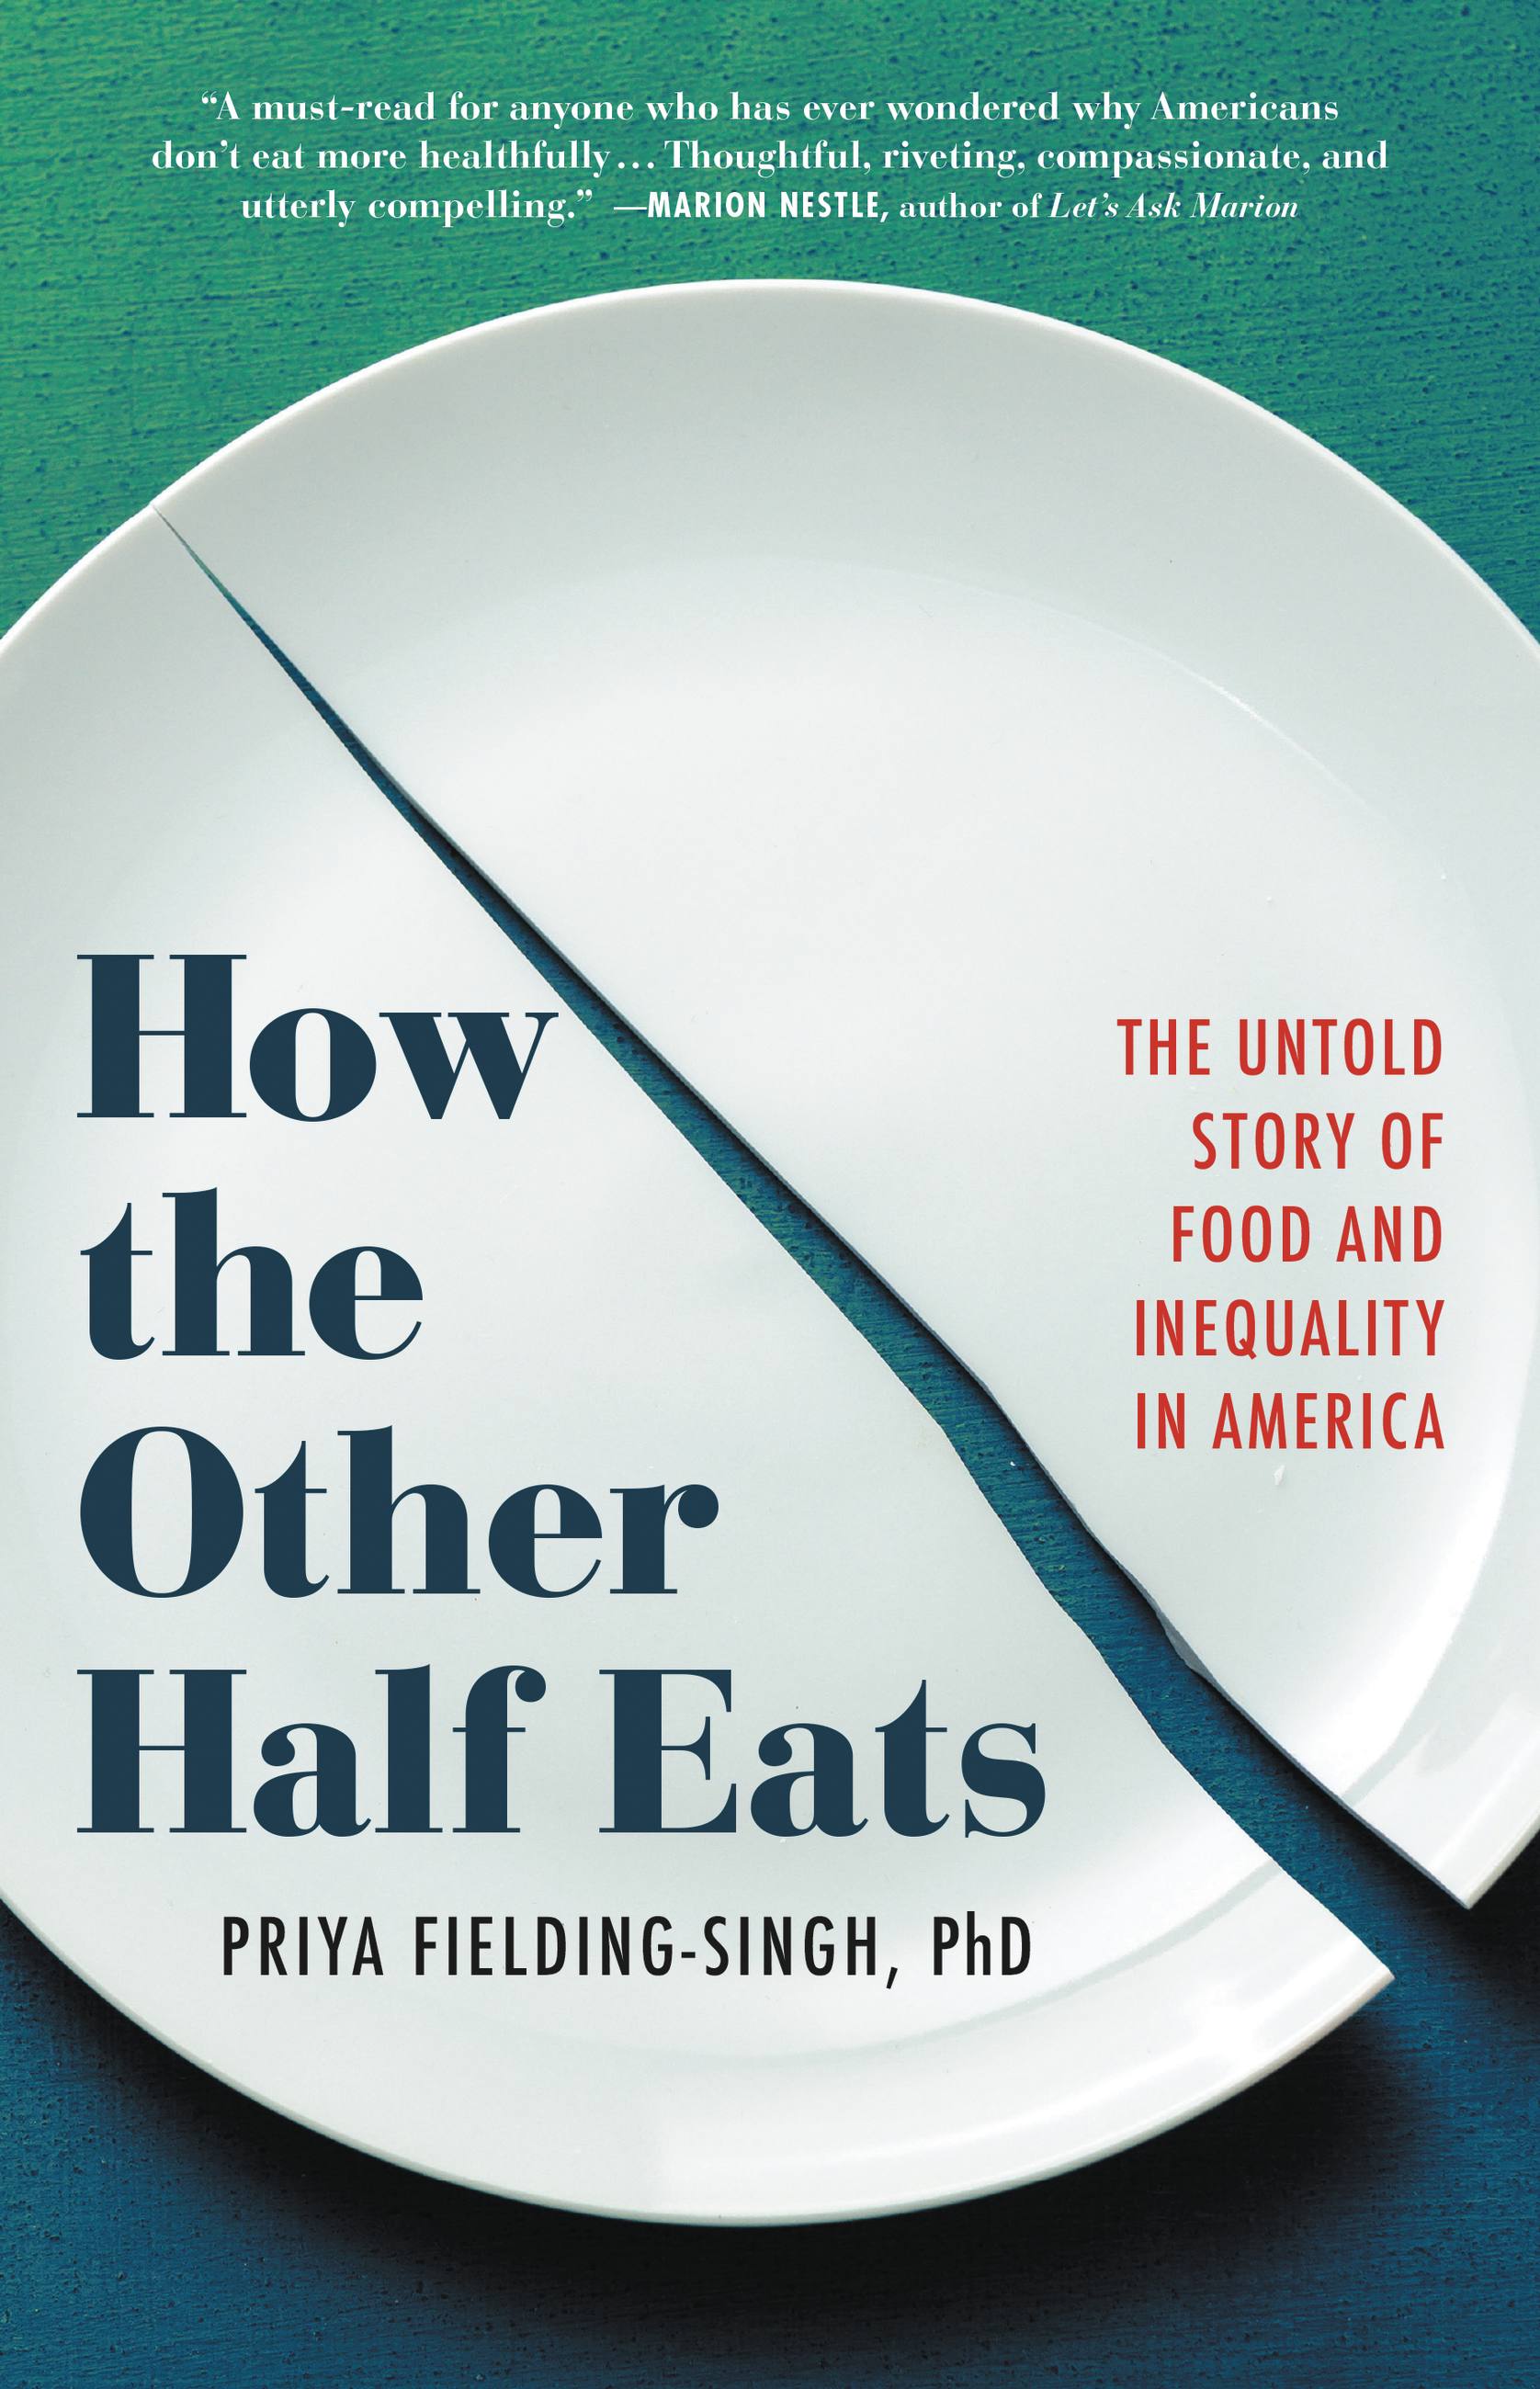 How the Other Half Eats by Priya Fielding-Singh, PhD Hachette Book Group picture photo